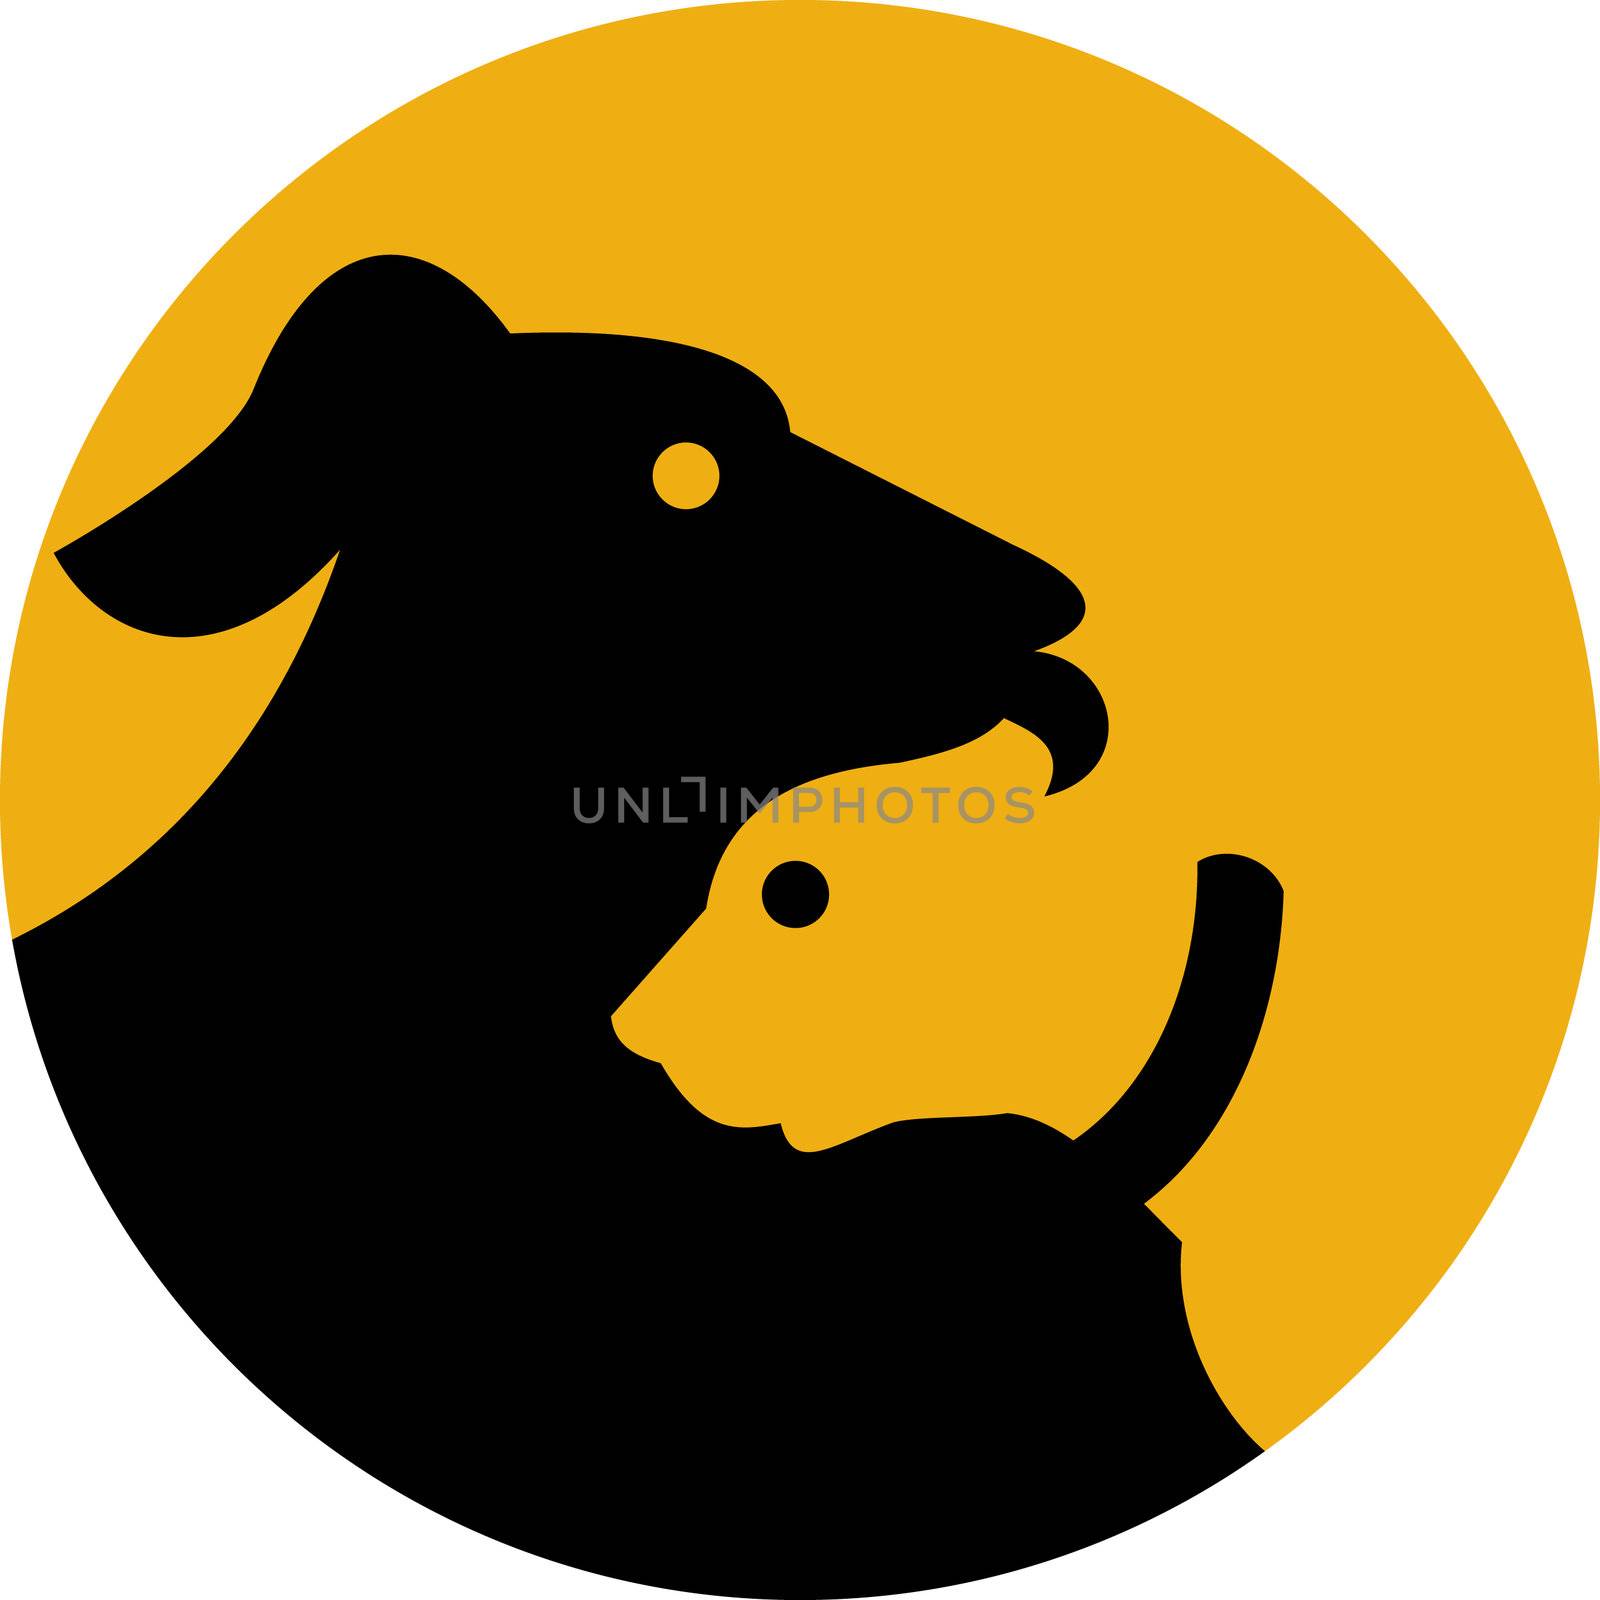 illustration of a sign, symbol or icon shown a dog and cat silhouette